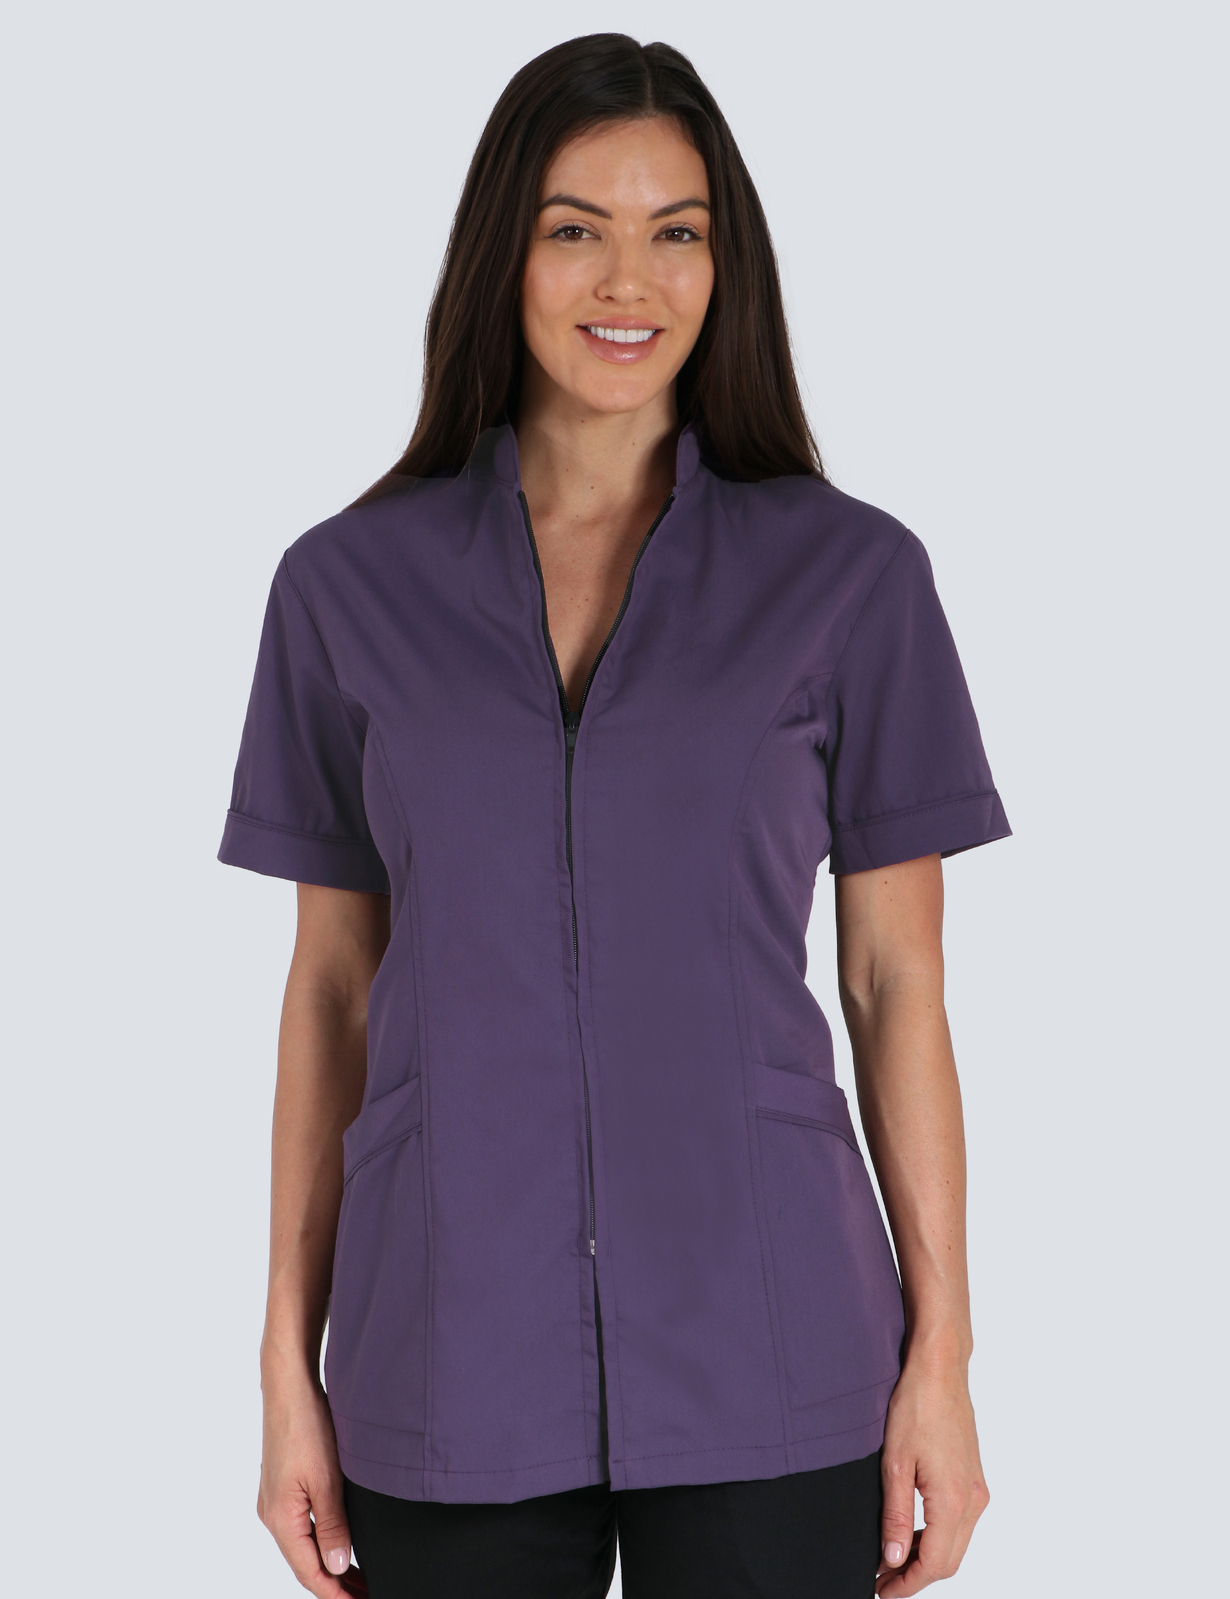 The Park - Centre for Mental Health - Pharmacy Uniform Top only Bundle (Nellie Style Tunic Top incl Logo)